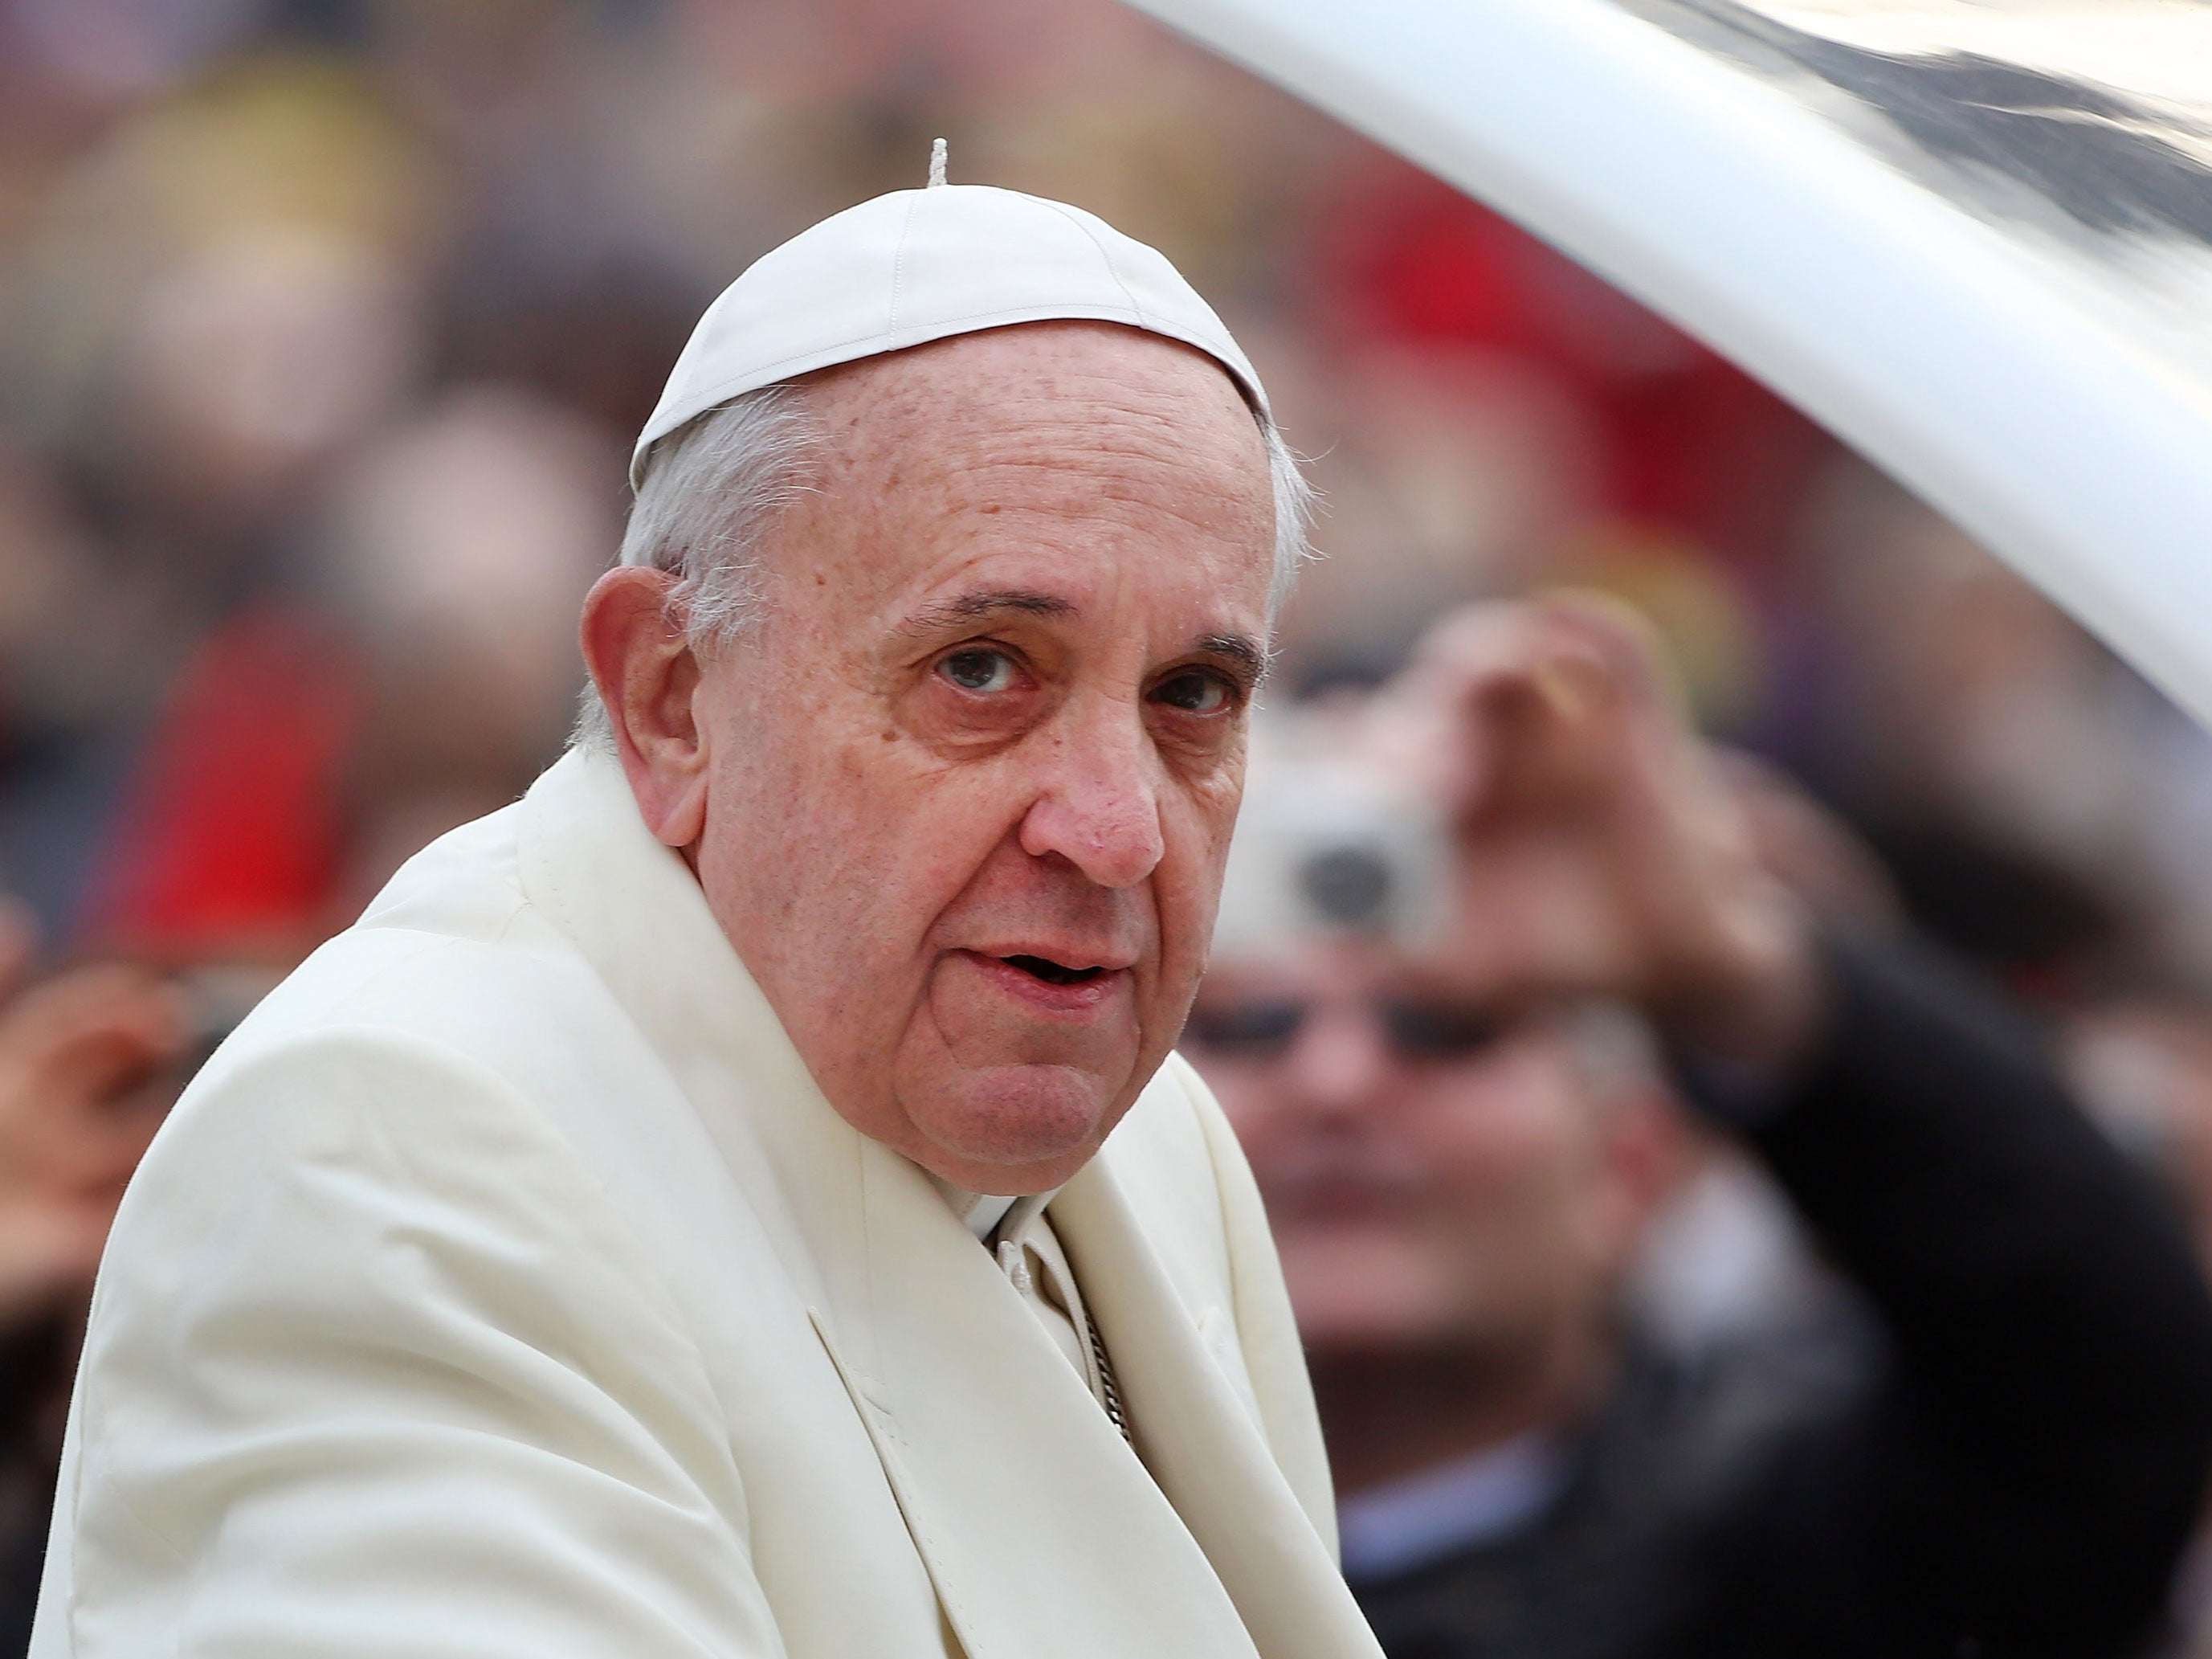 Pope Francis' approval ratings in the USA have plummeted in the last year